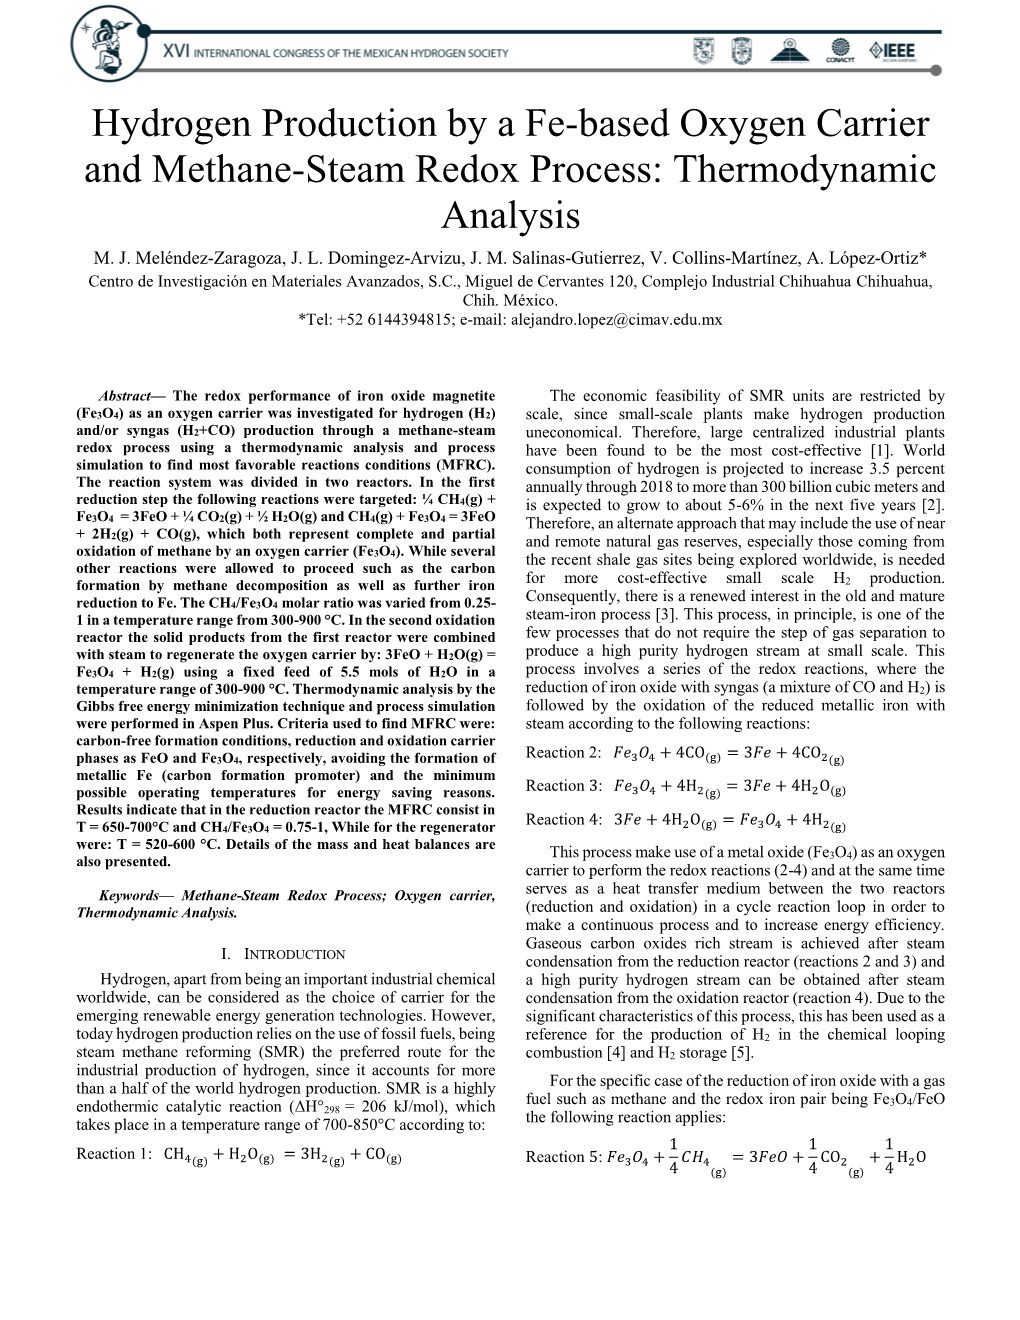 Hydrogen Production by a Fe-Based Oxygen Carrier and Methane-Steam Redox Process: Thermodynamic